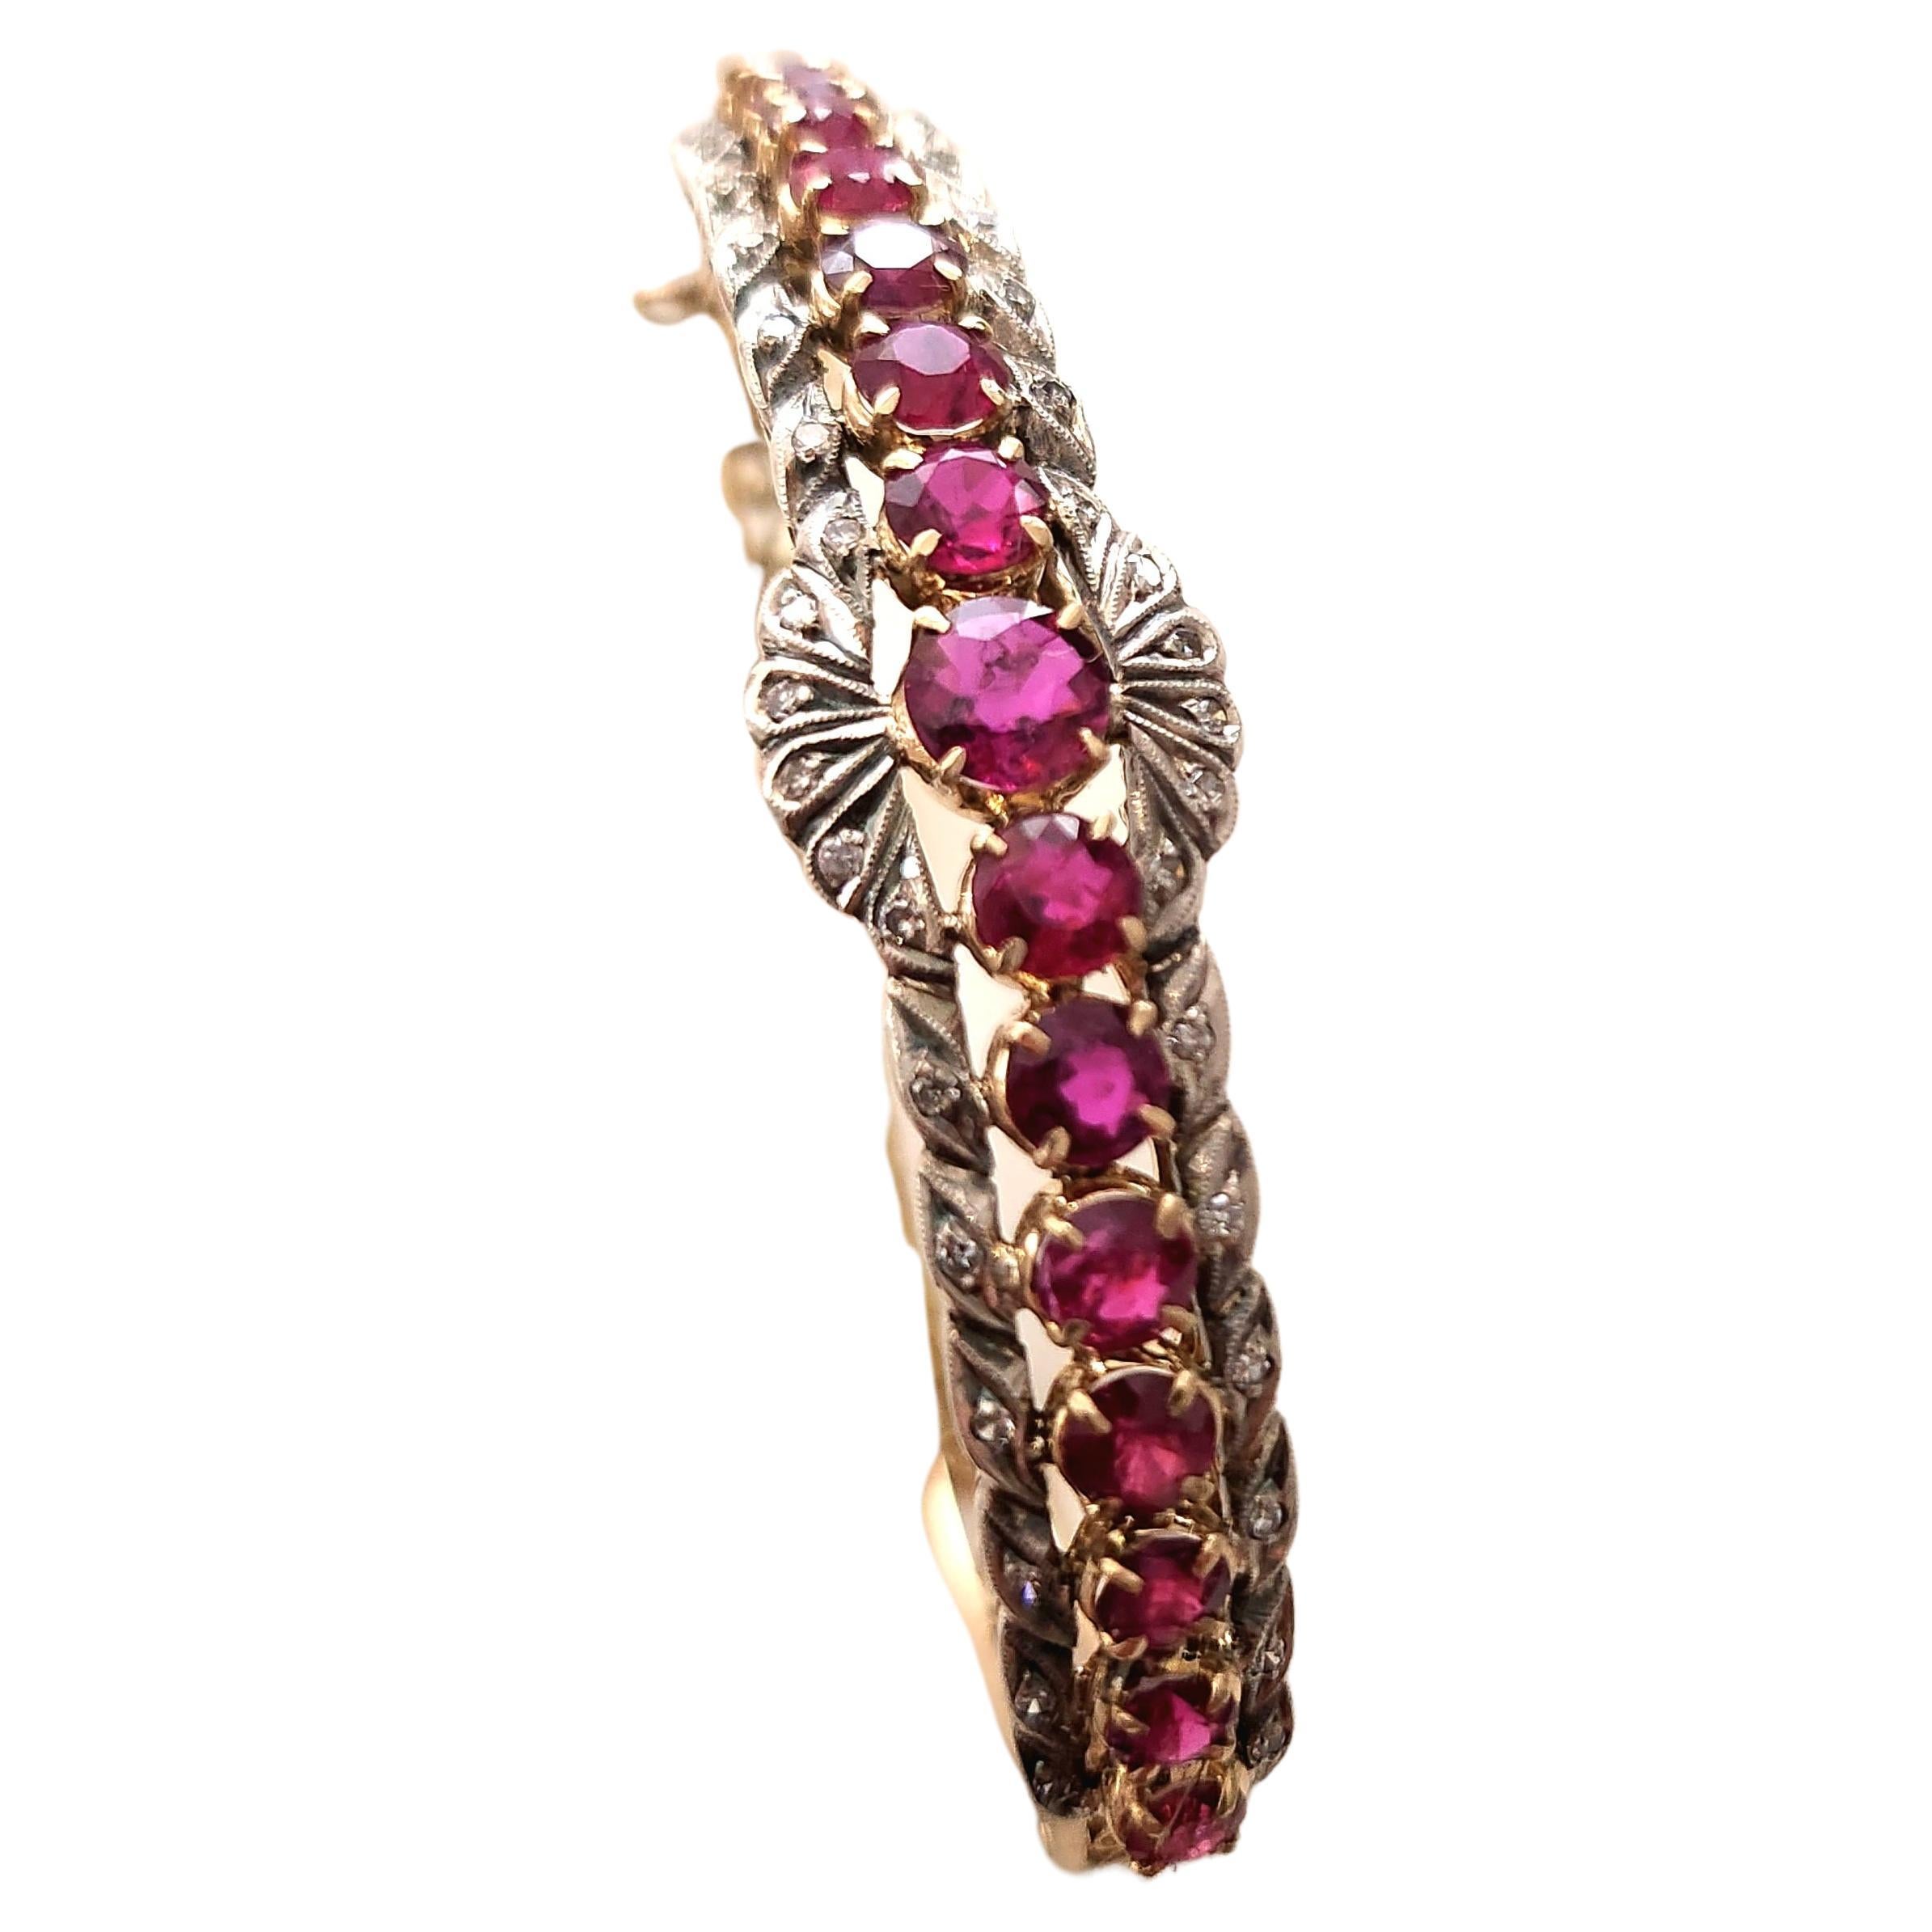 Antique ruby burmise orgine pigion blood color bangel bracelet with an estimate weight of 4 carats flanked with small diamonds in 14k gold open work style on bracelet sides bracelet width 6cm hall marked 56 imperial russian gold standard 